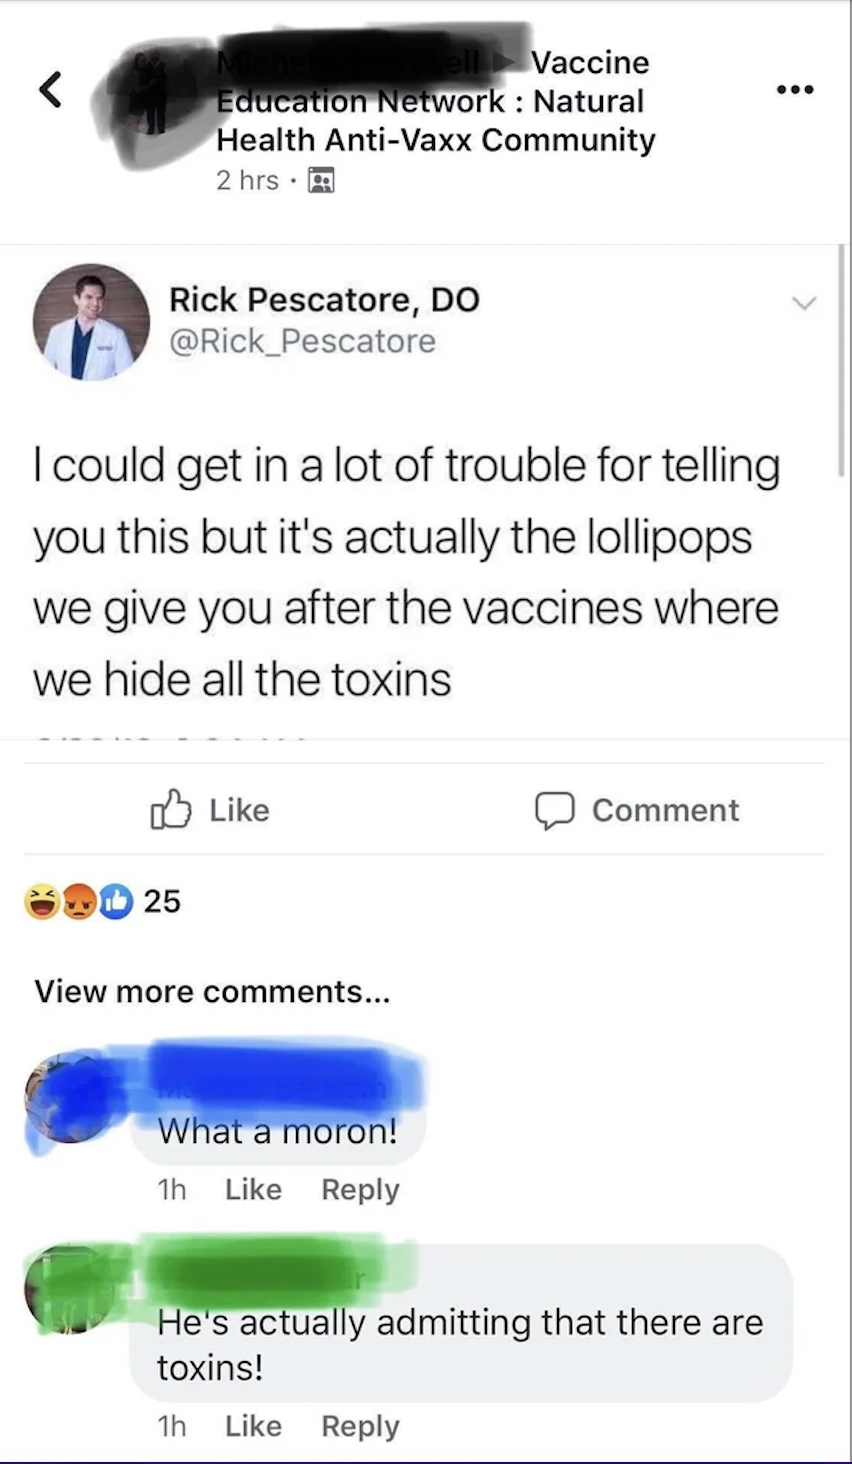 People who didn't get the joke - Vaccine Education Network Natural Health AntiVaxx Community 2 hrs.